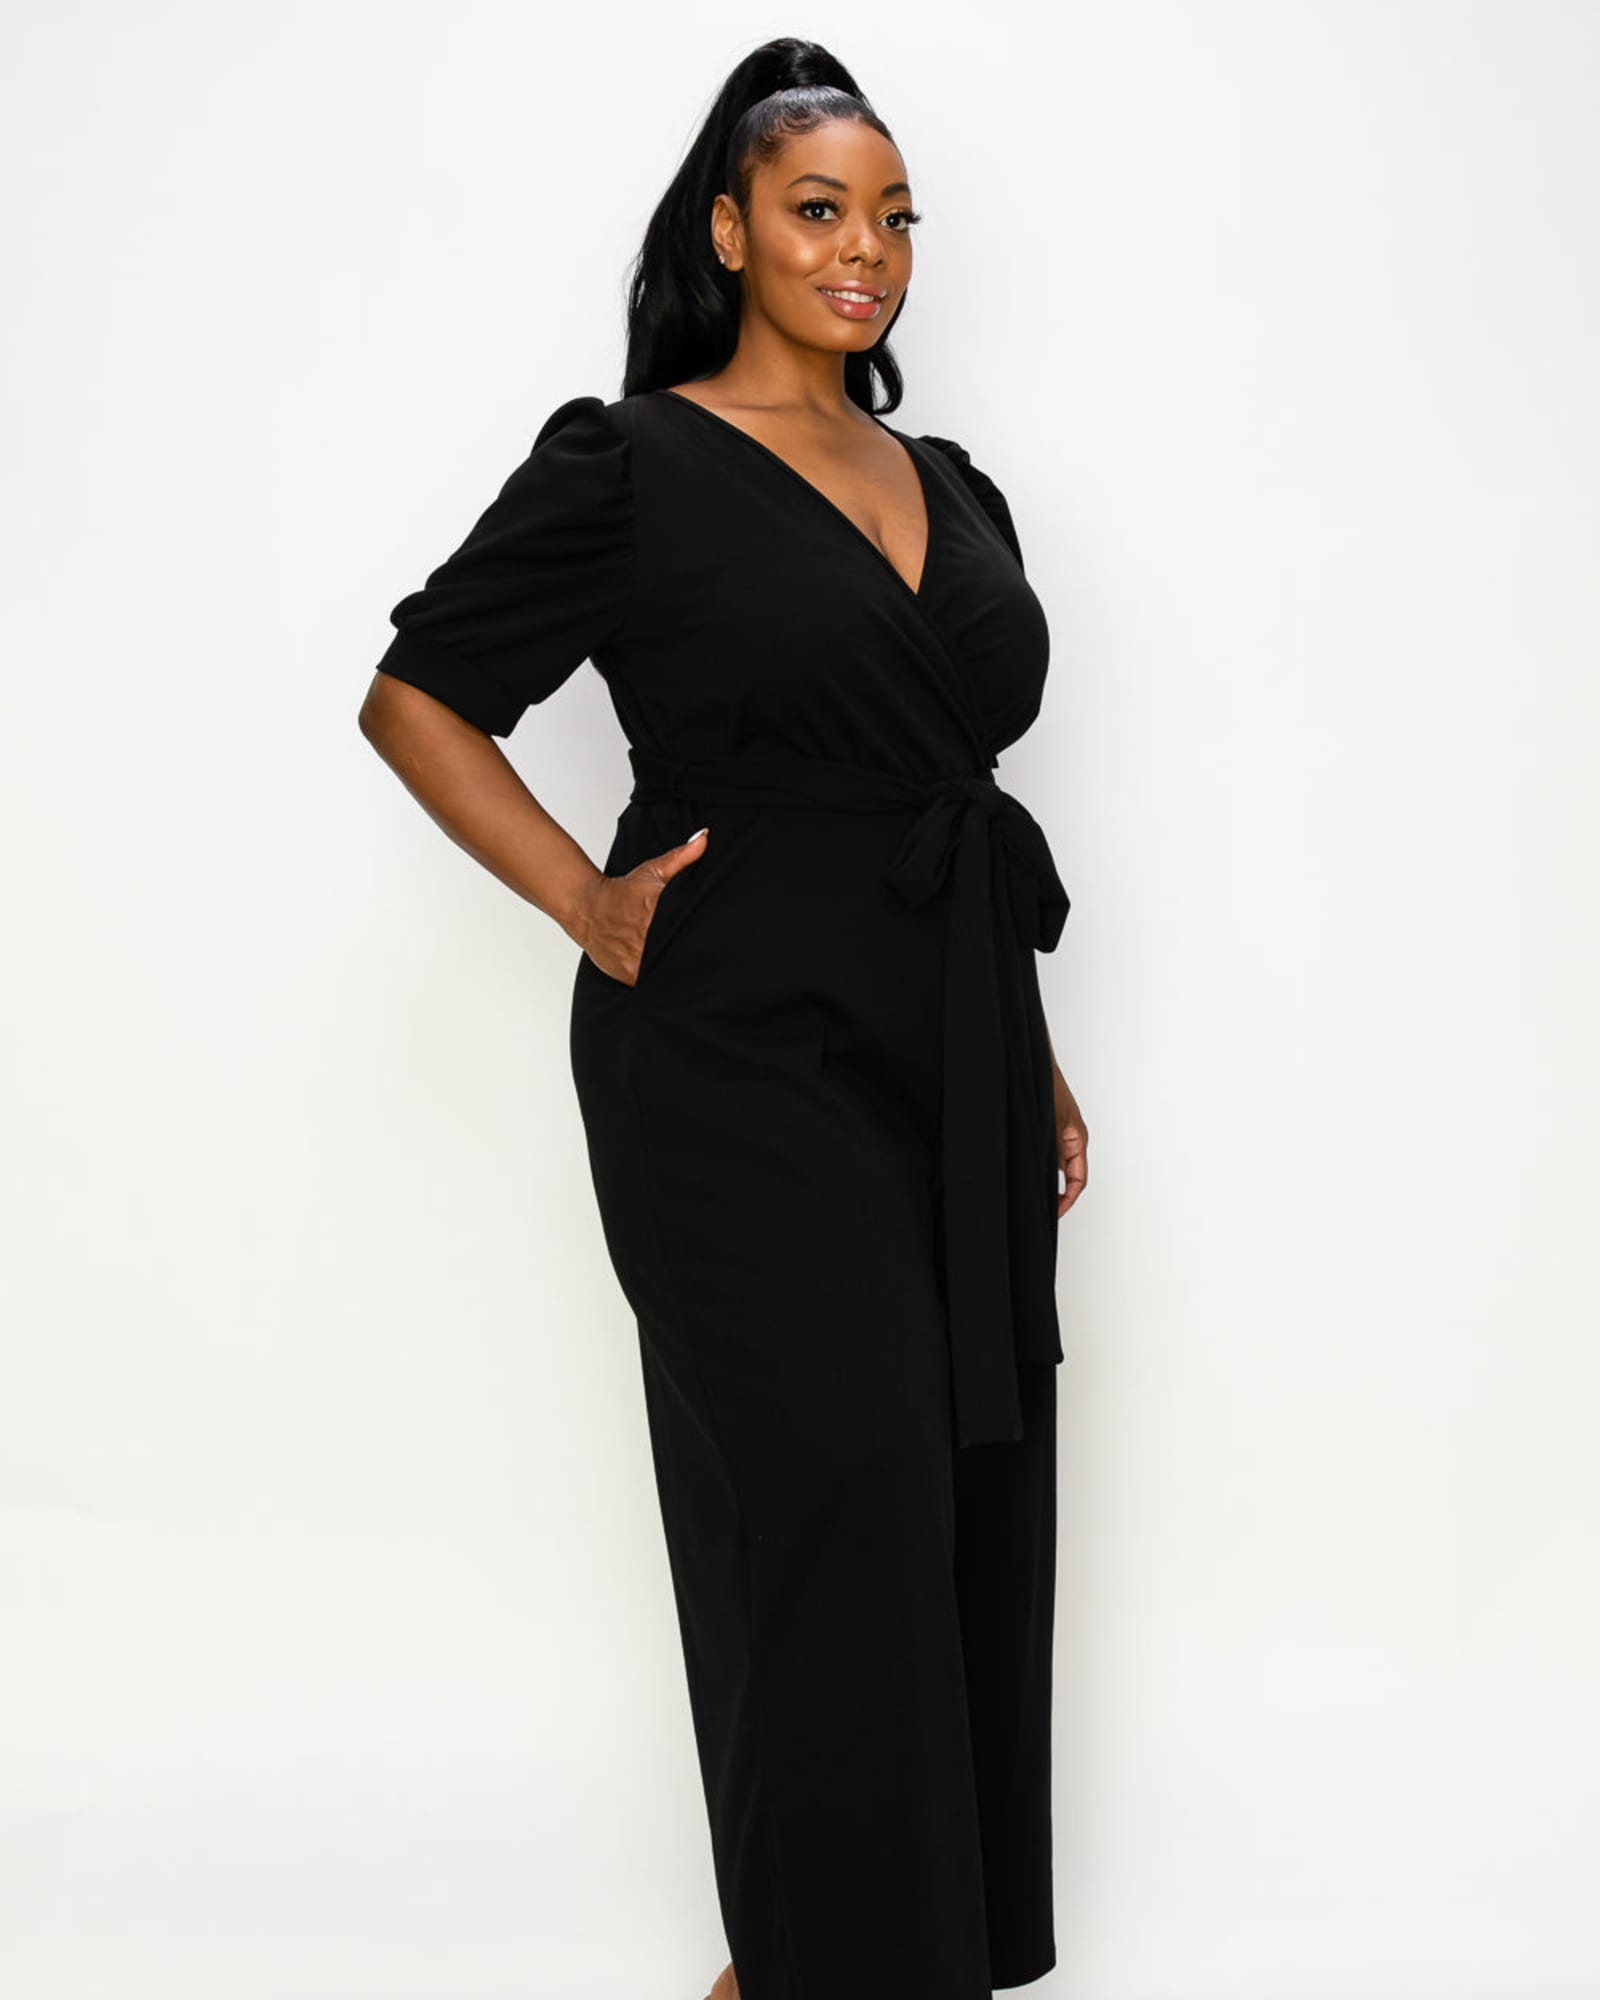 Plus Size Elegant Black Long Sleeve Jumpsuit Formal For Women Sexy  Bodysuits With Long Sleeves For Evening Wear From Dongporou, $20.64